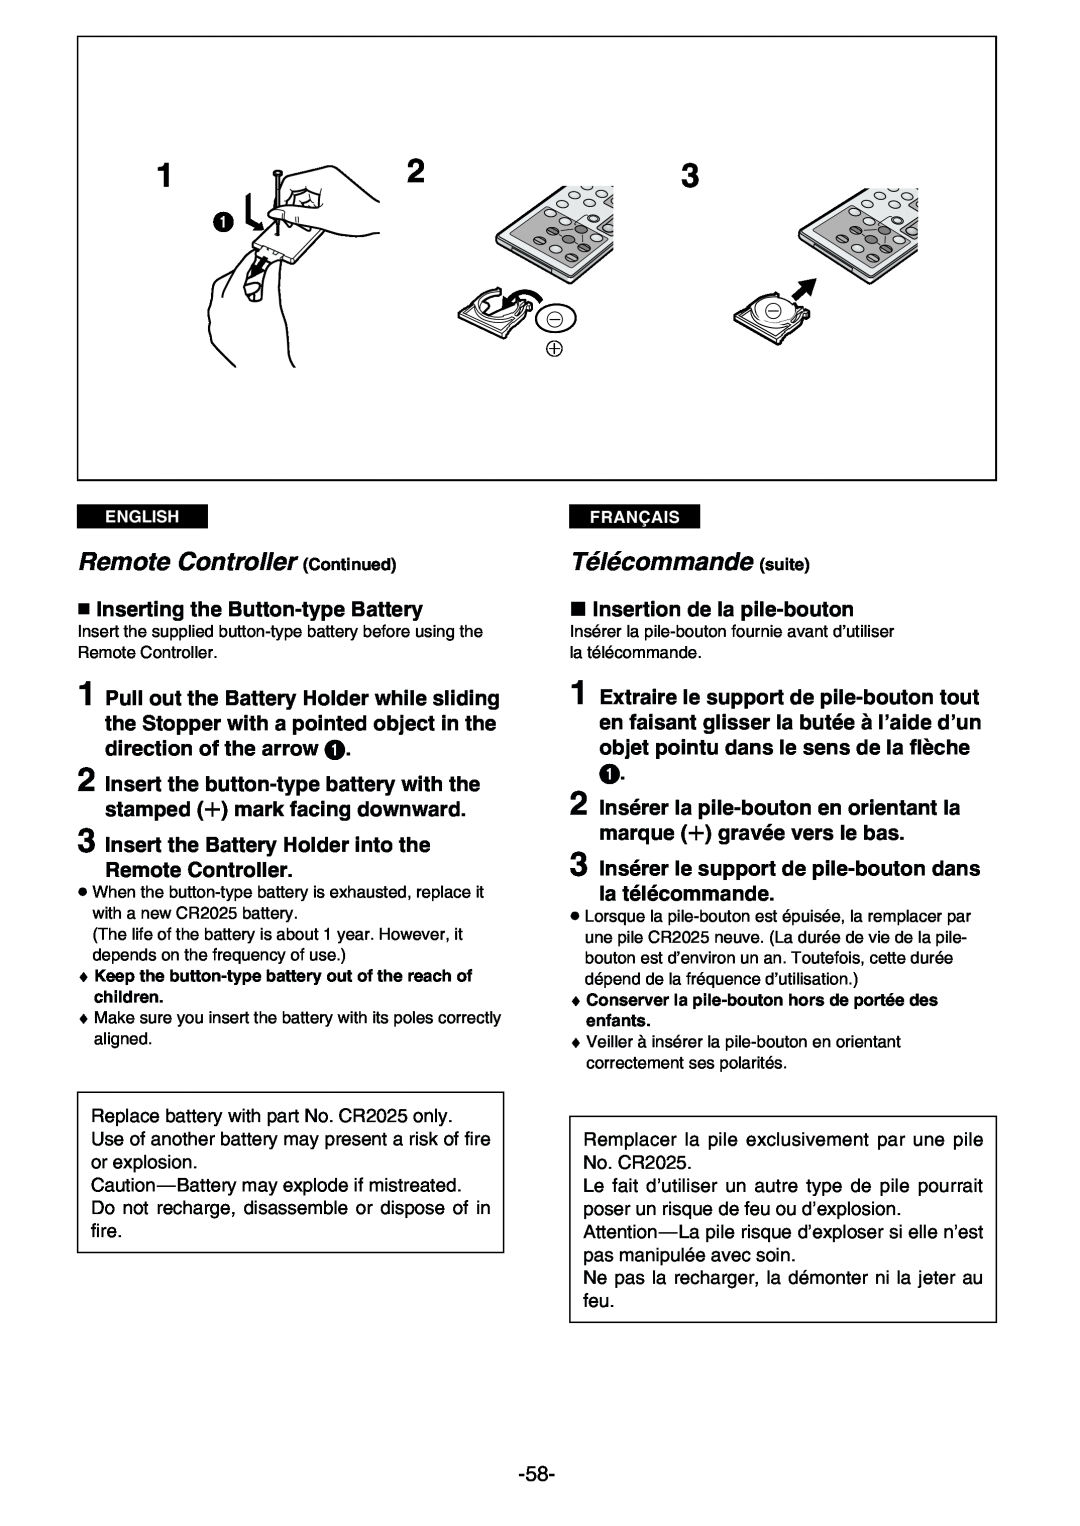 Panasonic AG- DVC 15P manual Remote Controller Continued, Télécommande suite, « Inserting the Button-type Battery 